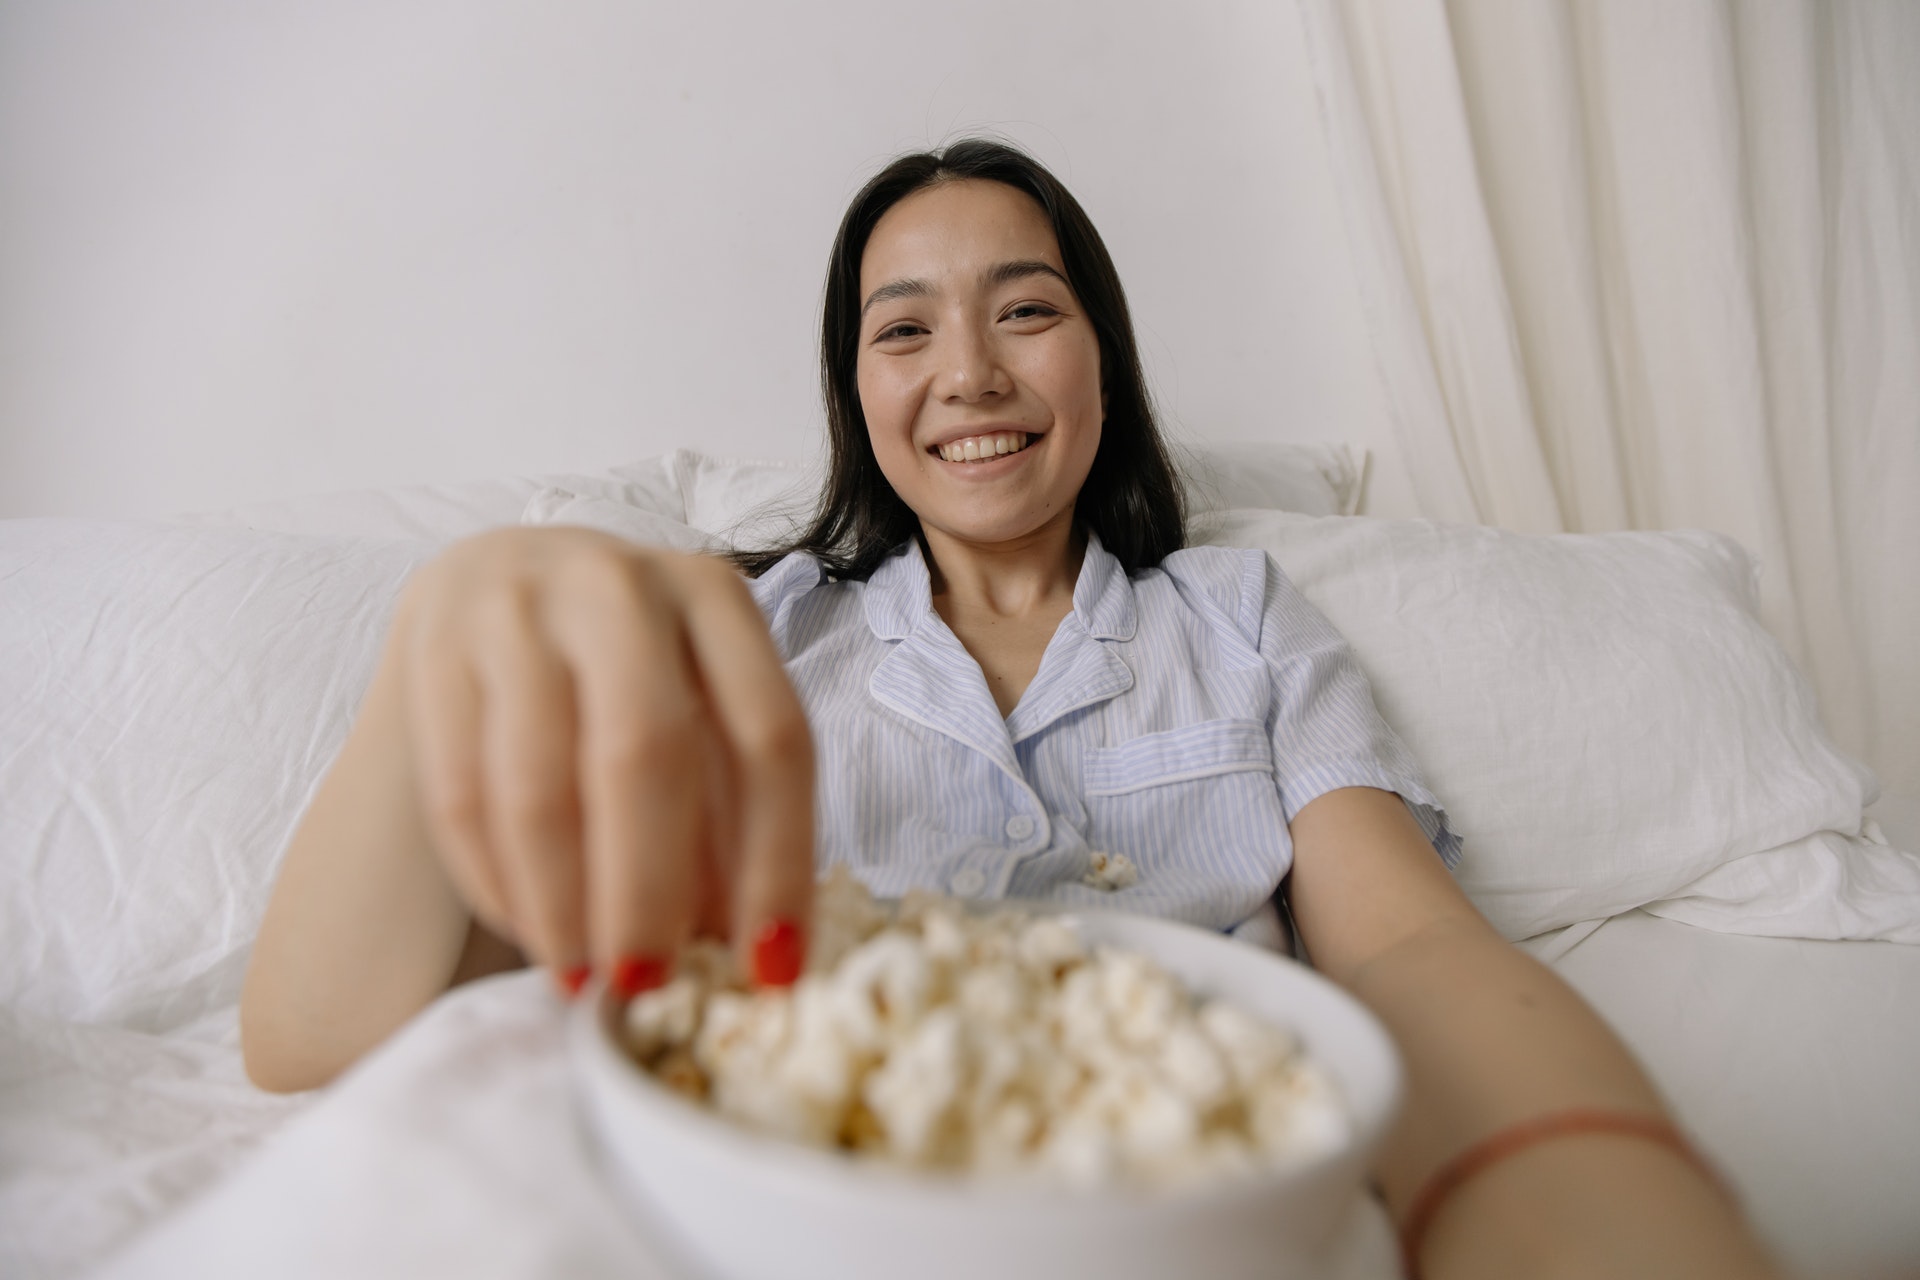 Young woman eating popcorn in bed before going to sleep